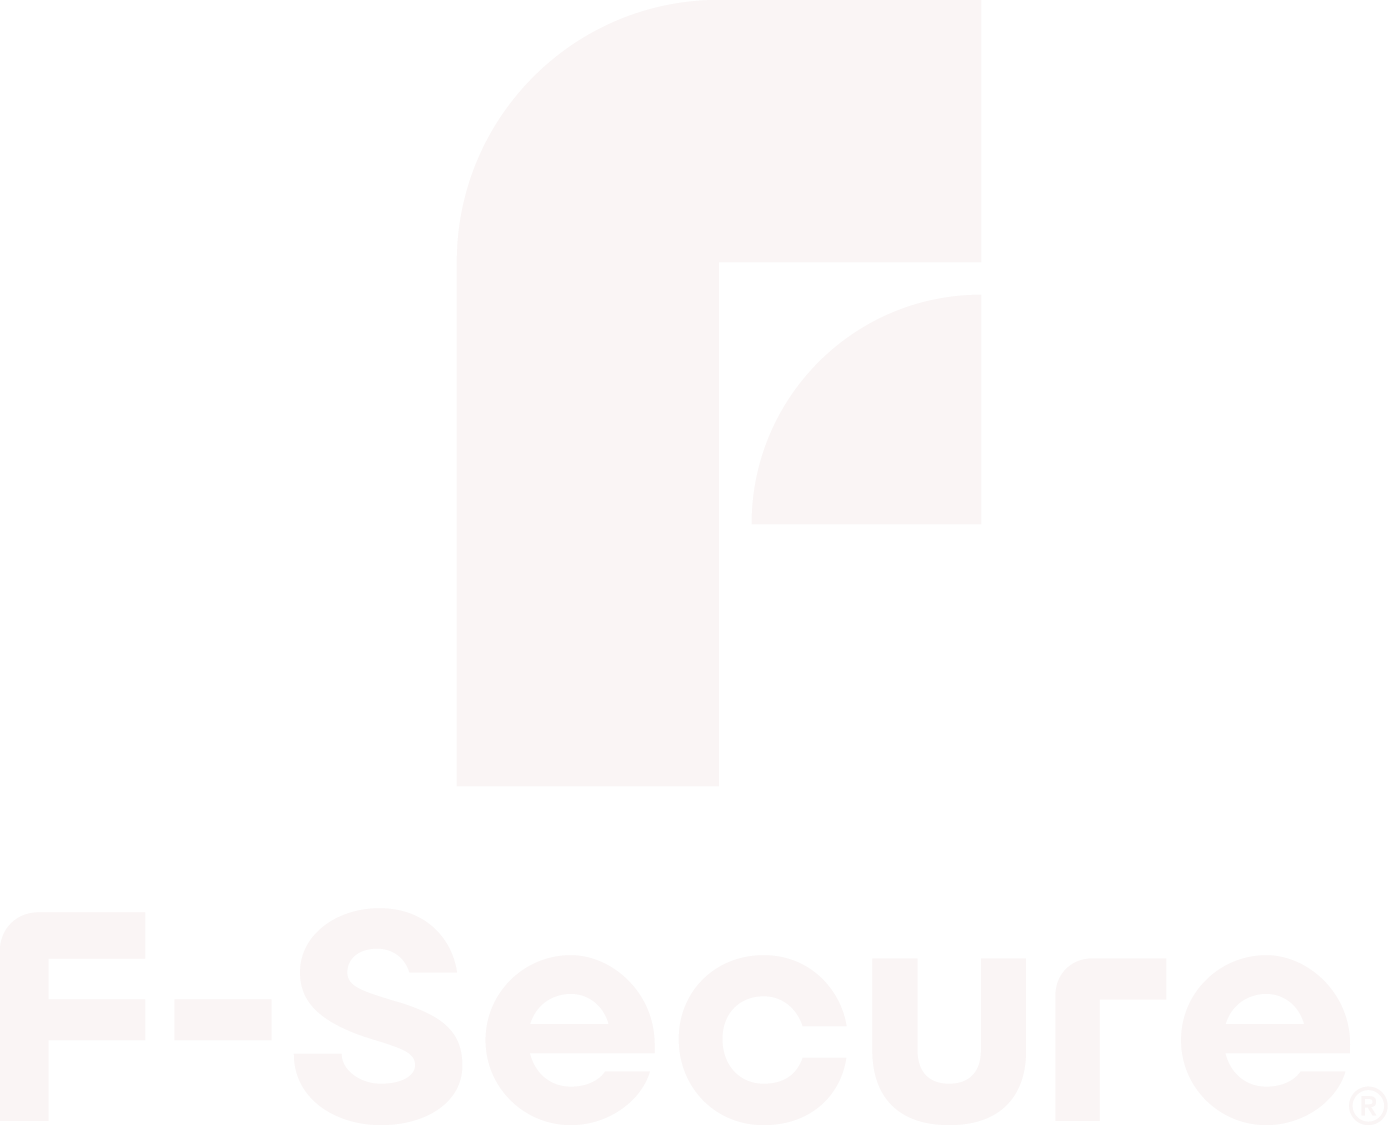 F-SECURE_LOGO_VERTICAL_OFF WHITE_RGB